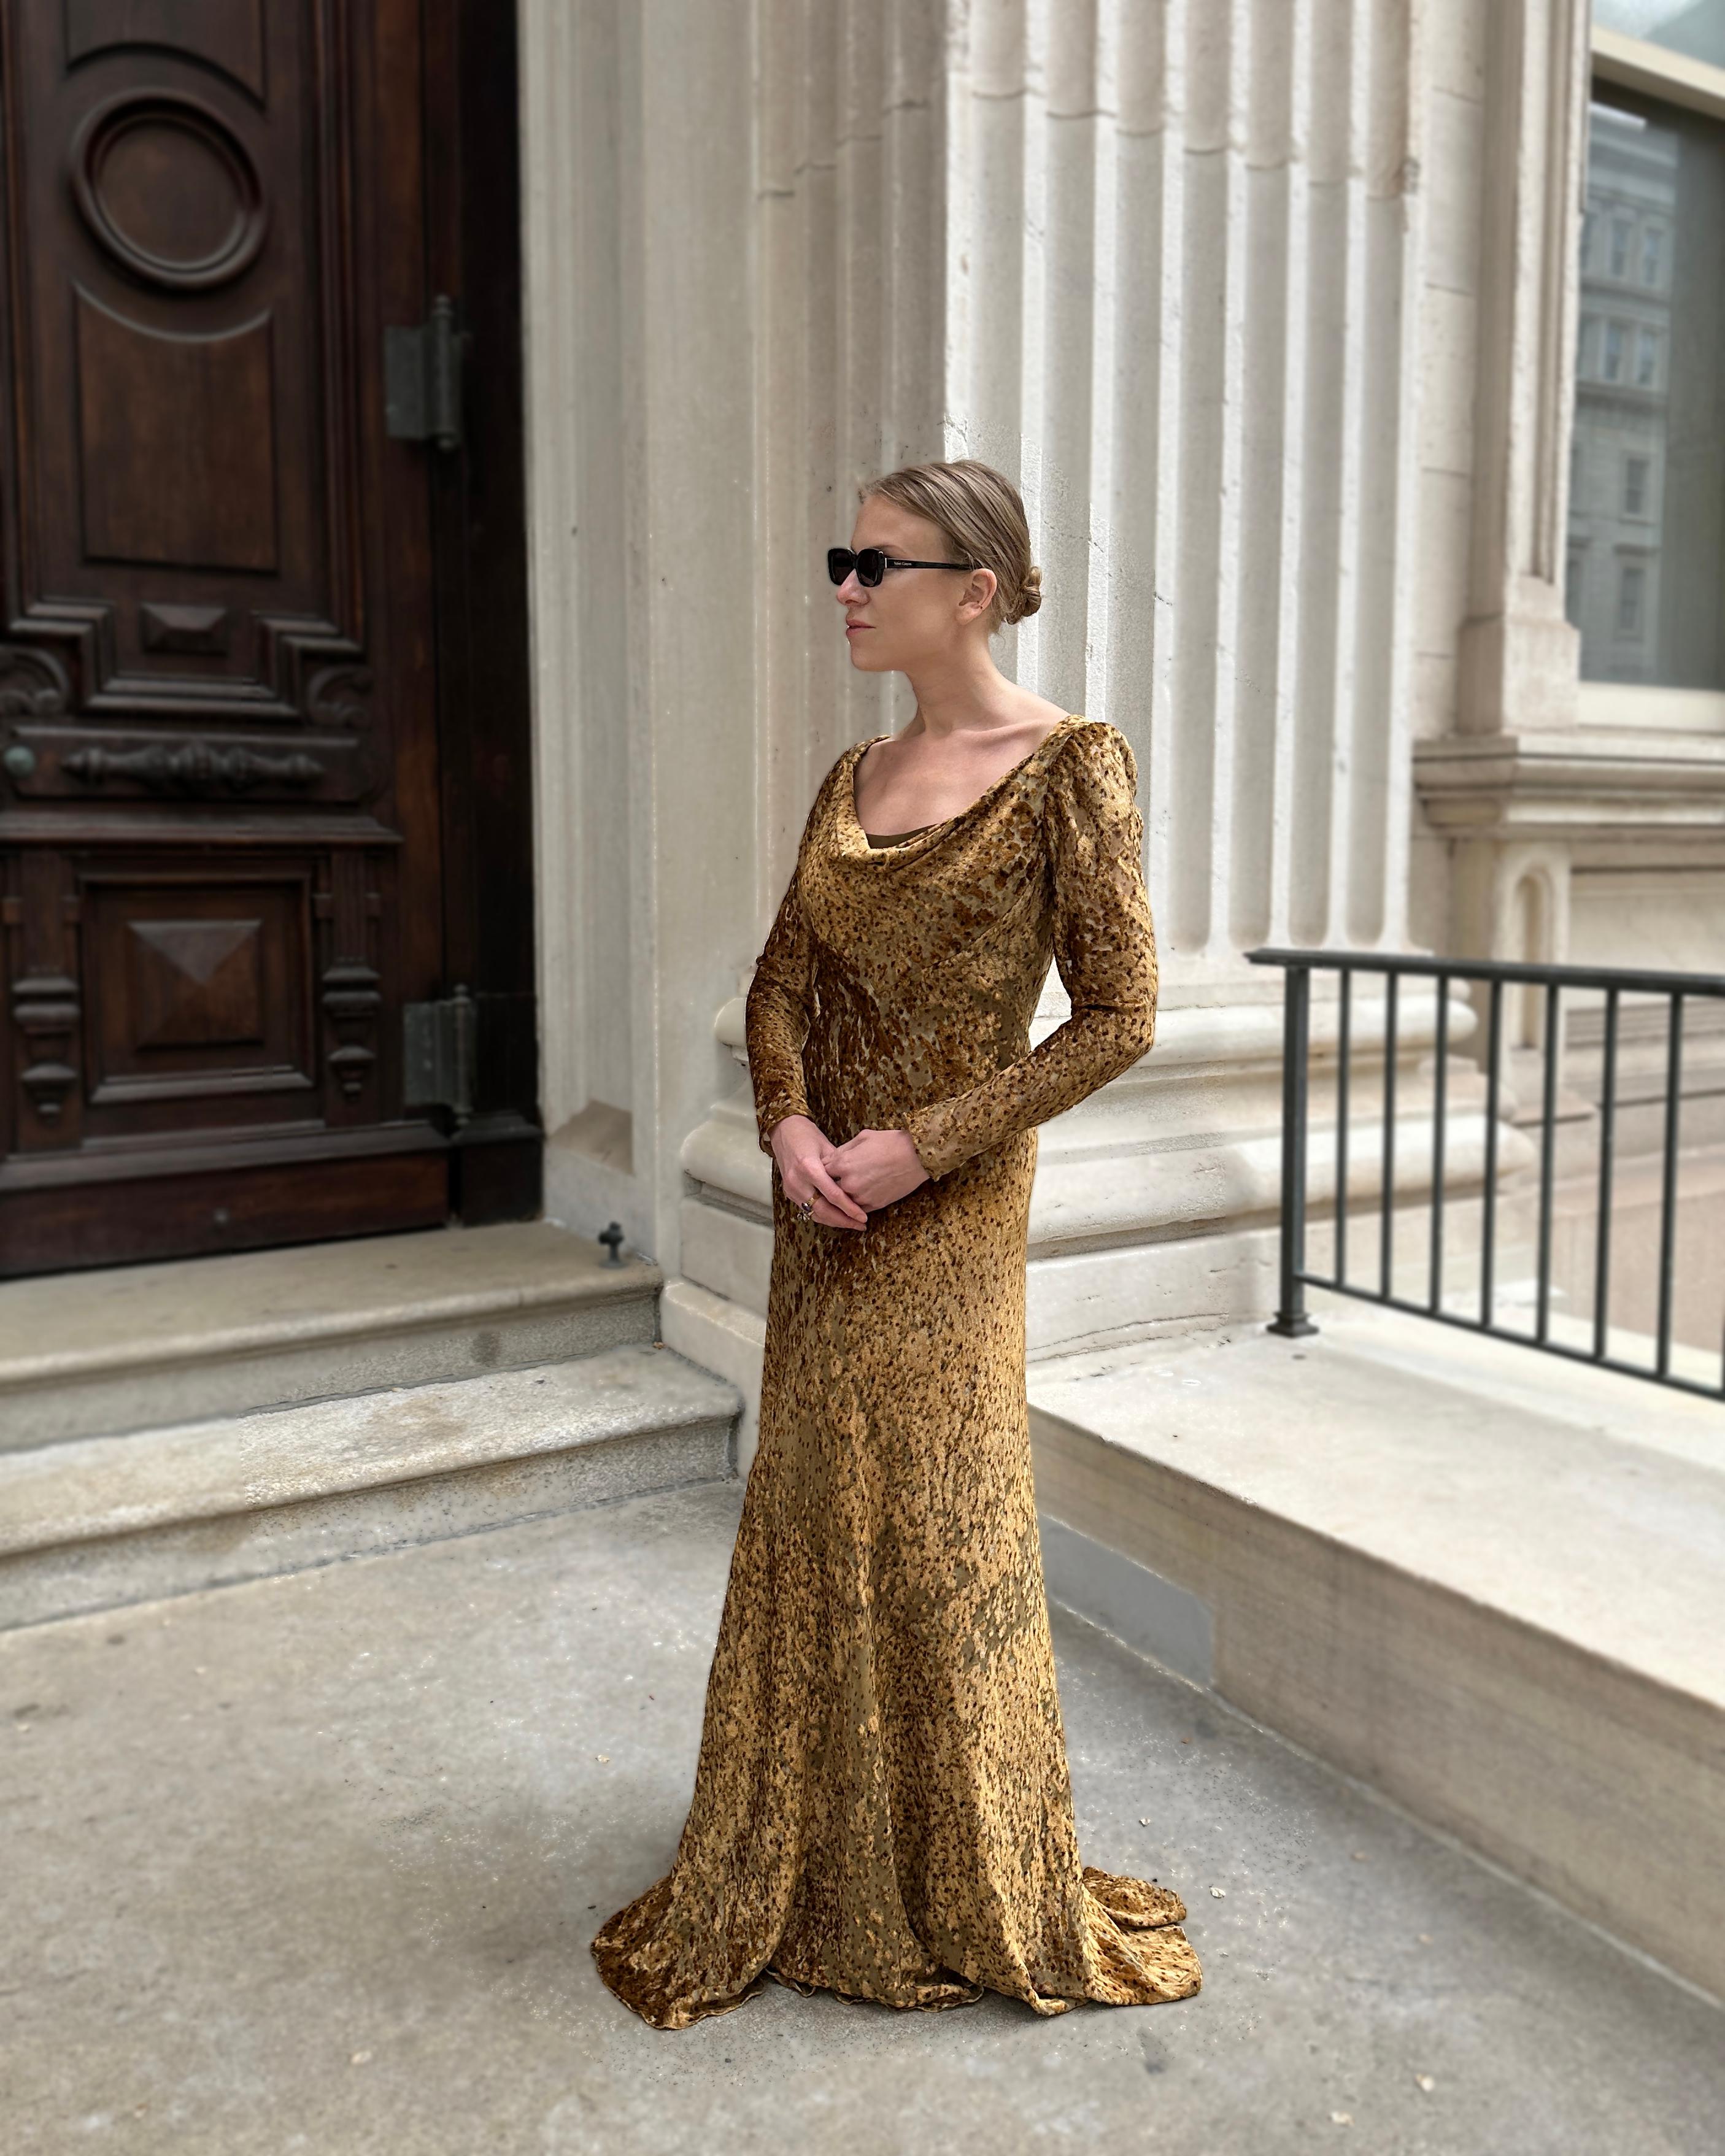 This show-stopping vintage Oscar de la Renta velvet gown is a masterpiece of a dress, with couture-level details throughout. The devoré velvet with a subtle tonal animal print in a sublime shade of gold is bias-cut, for the most flattering fit